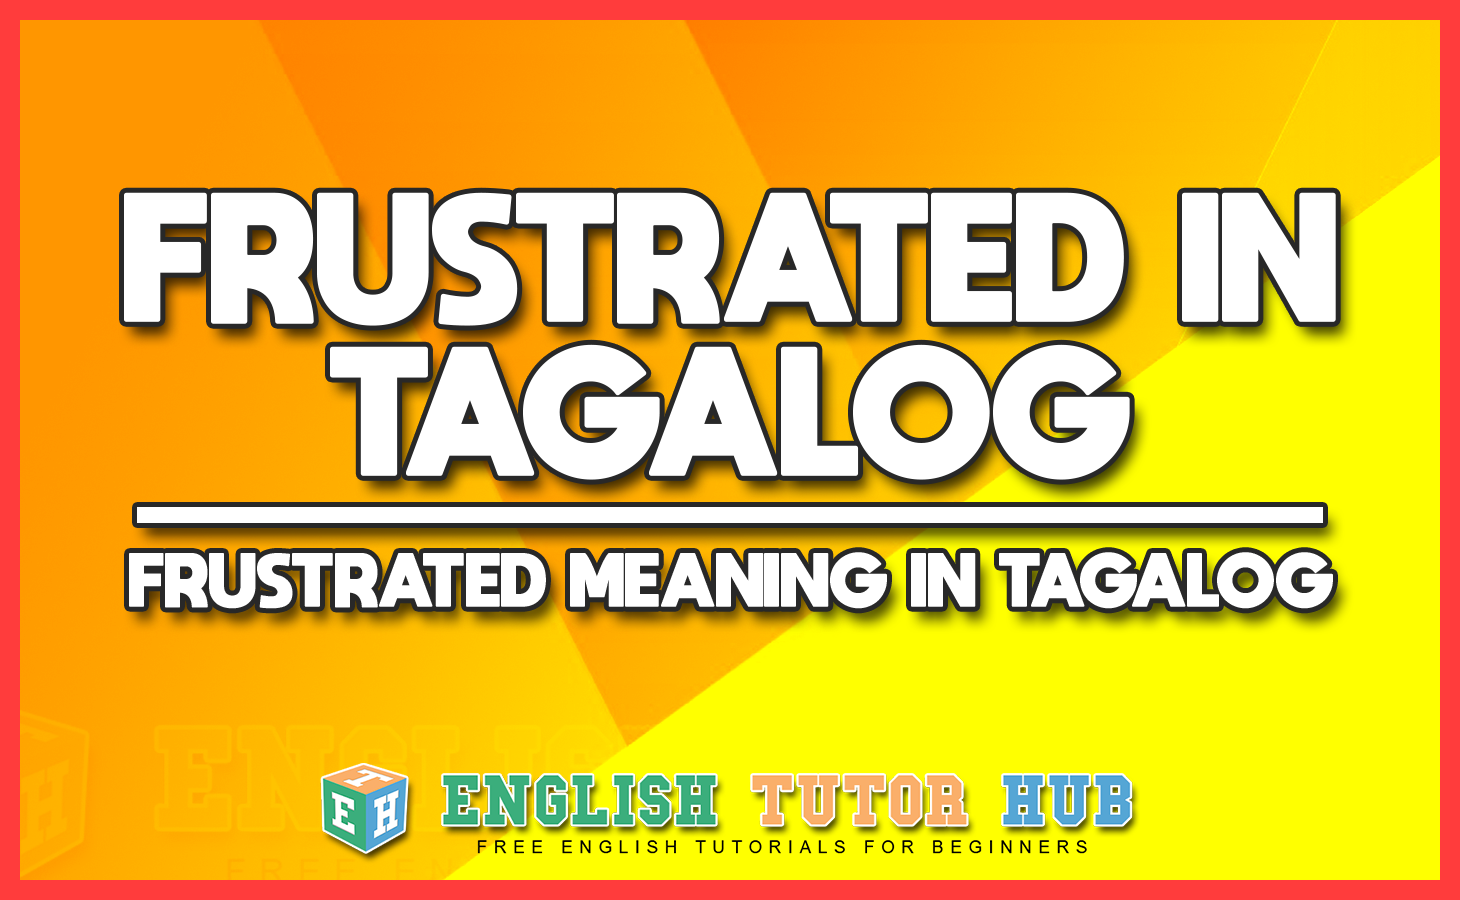 FRUSTRATED IN TAGALOG - FRUSTRATED MEANING IN TAGALOG